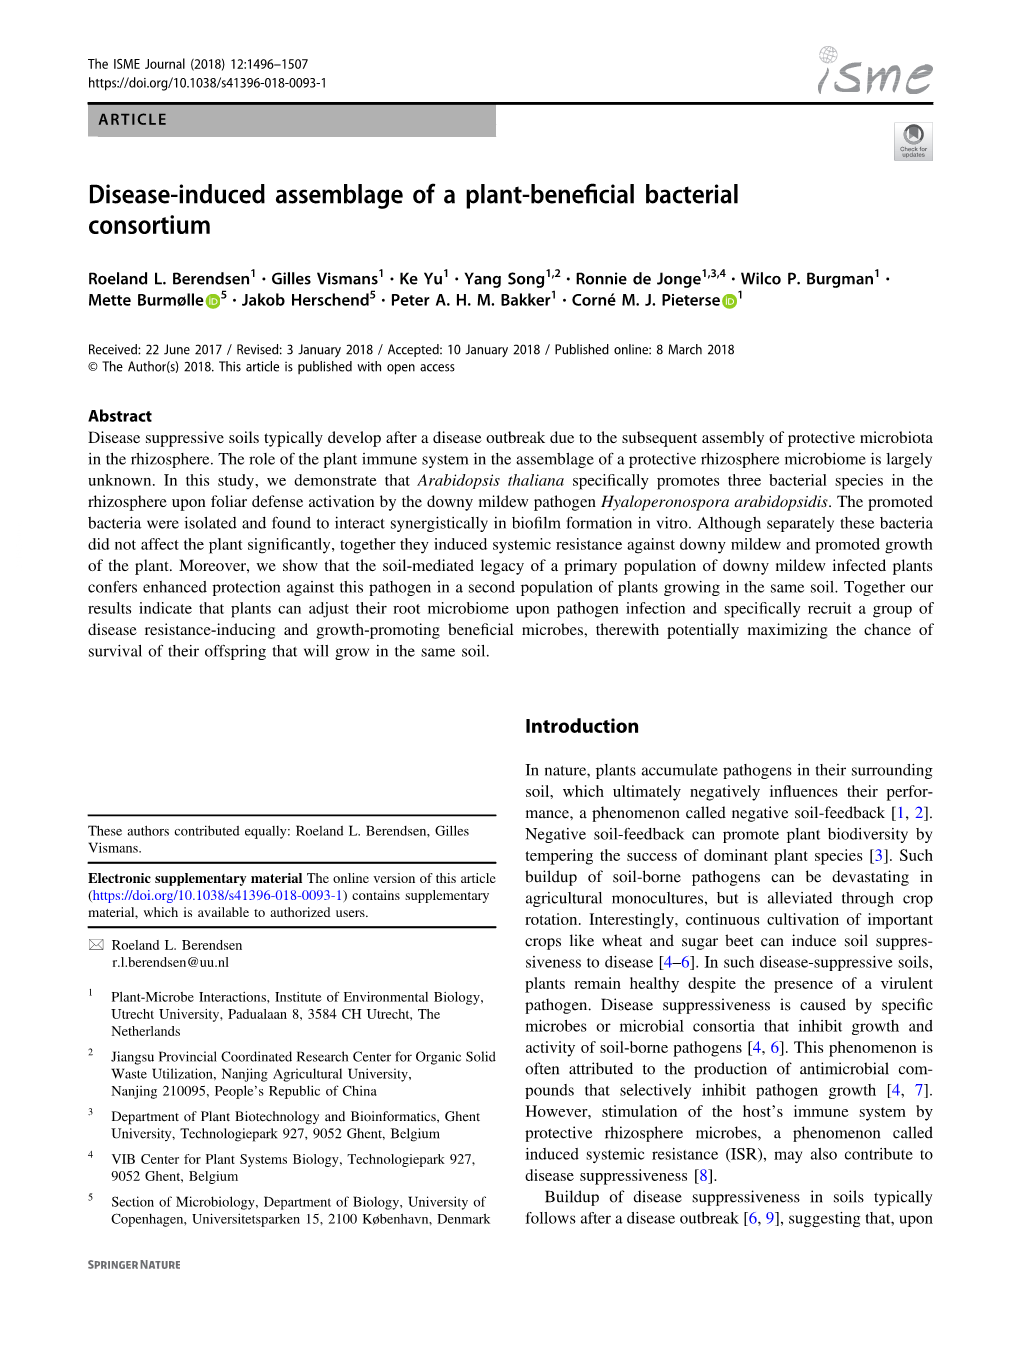 Disease-Induced Assemblage of a Plant-Beneficial Bacterial Consortium